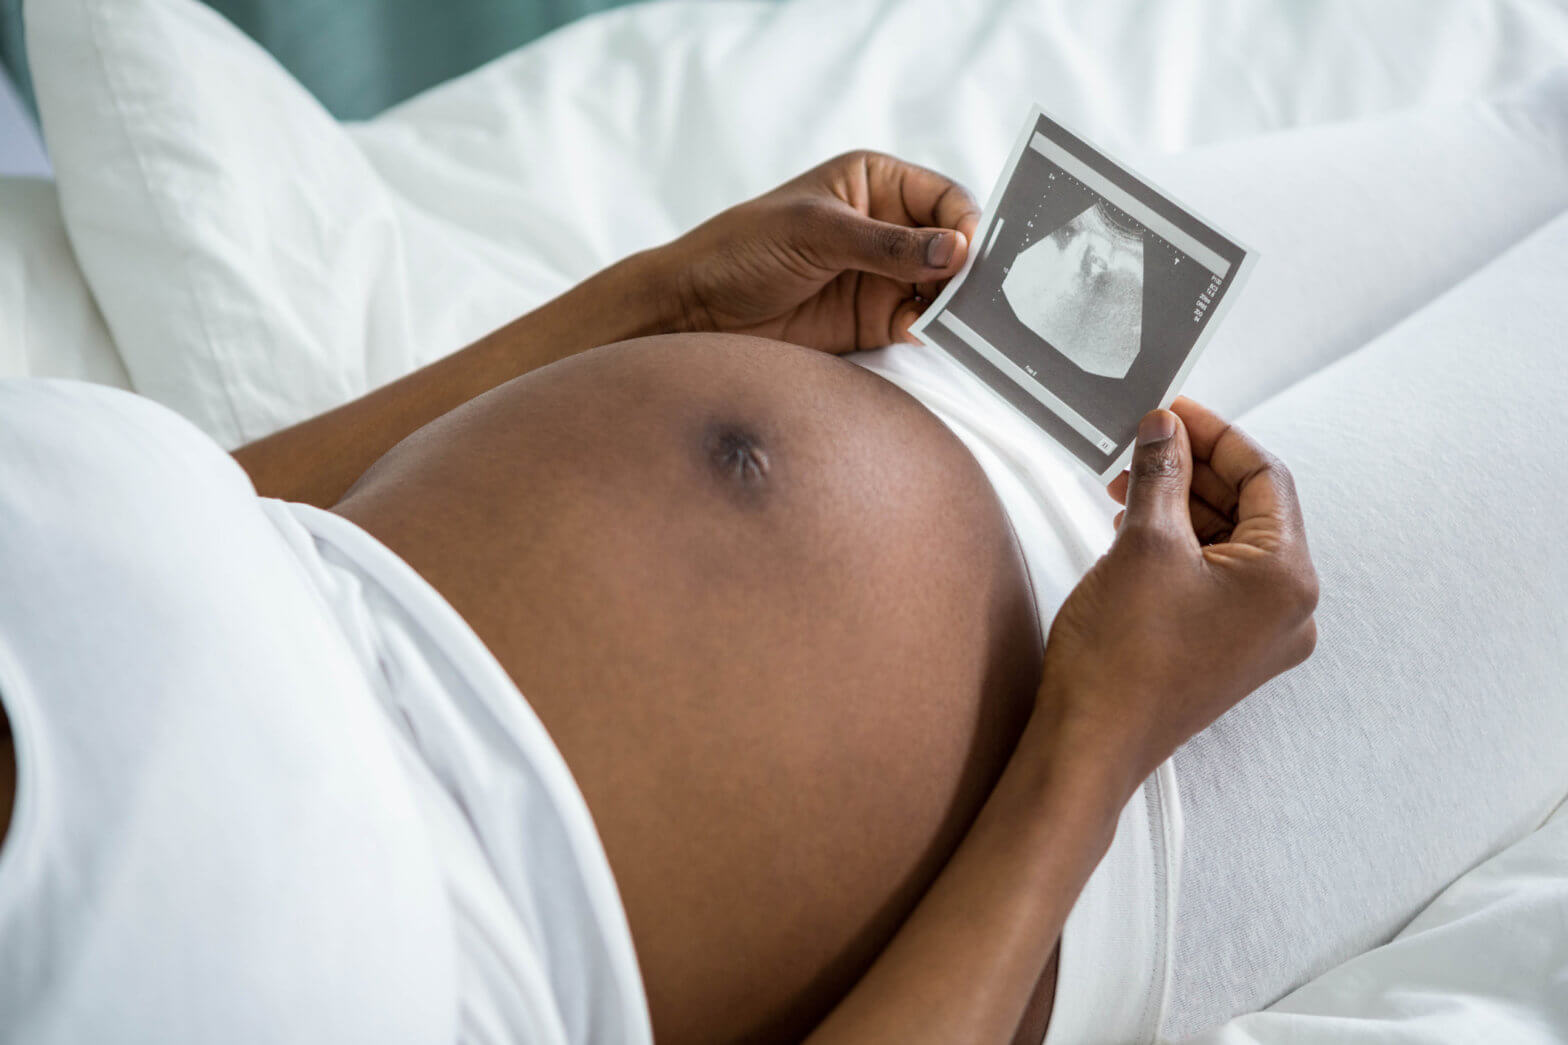 Pregnant woman looking at ultrasound pictures lying on her bed